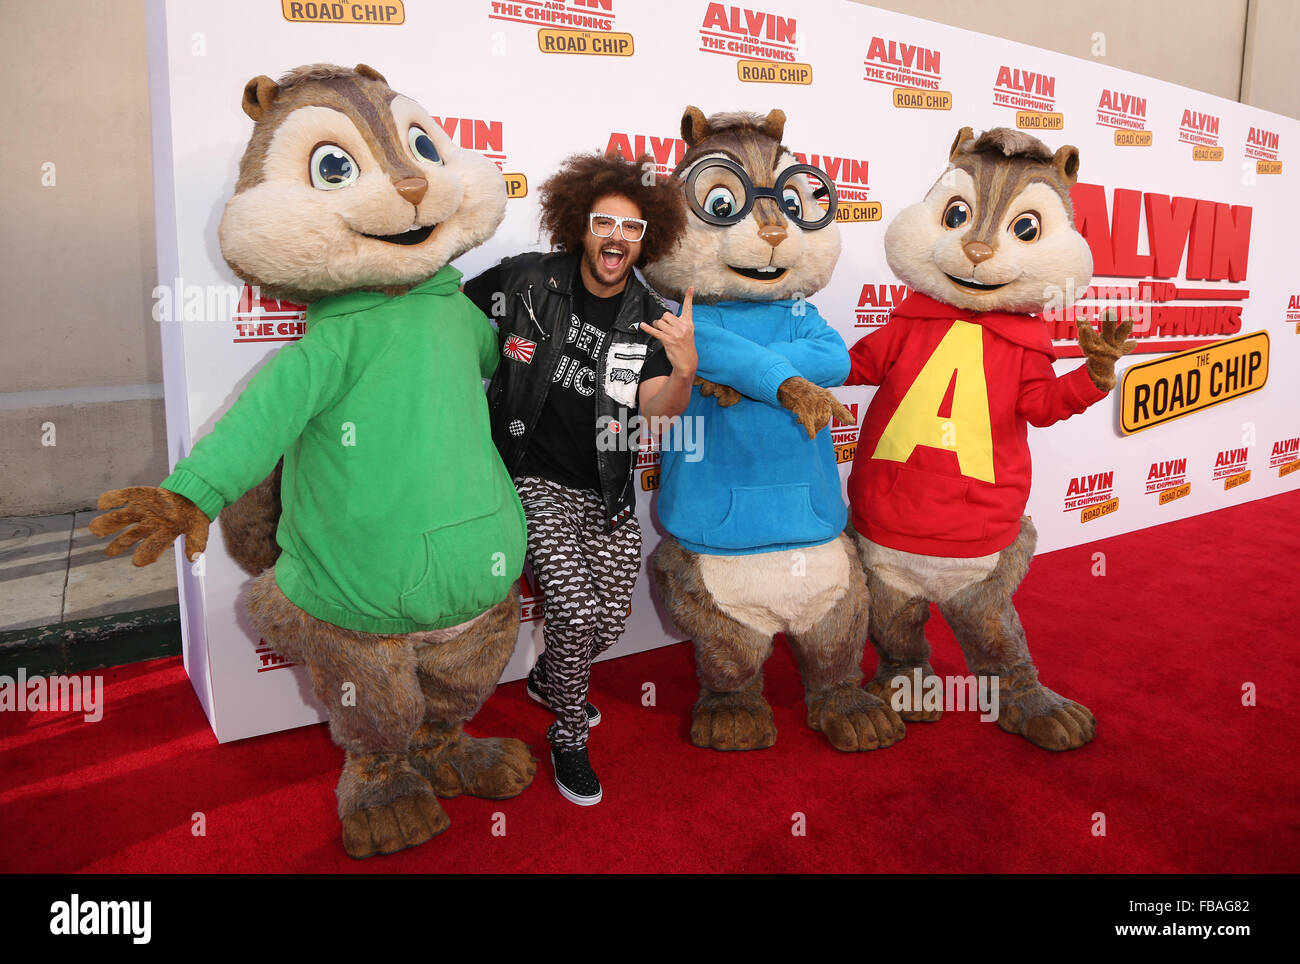 'Alvin and the Chipmunks: The Road Chip' premiere at the Darryl F. Zanuck Theatre  Featuring: Redfoo Where: Los Angeles, California, United States When: 12 Dec 2015 Stock Photo